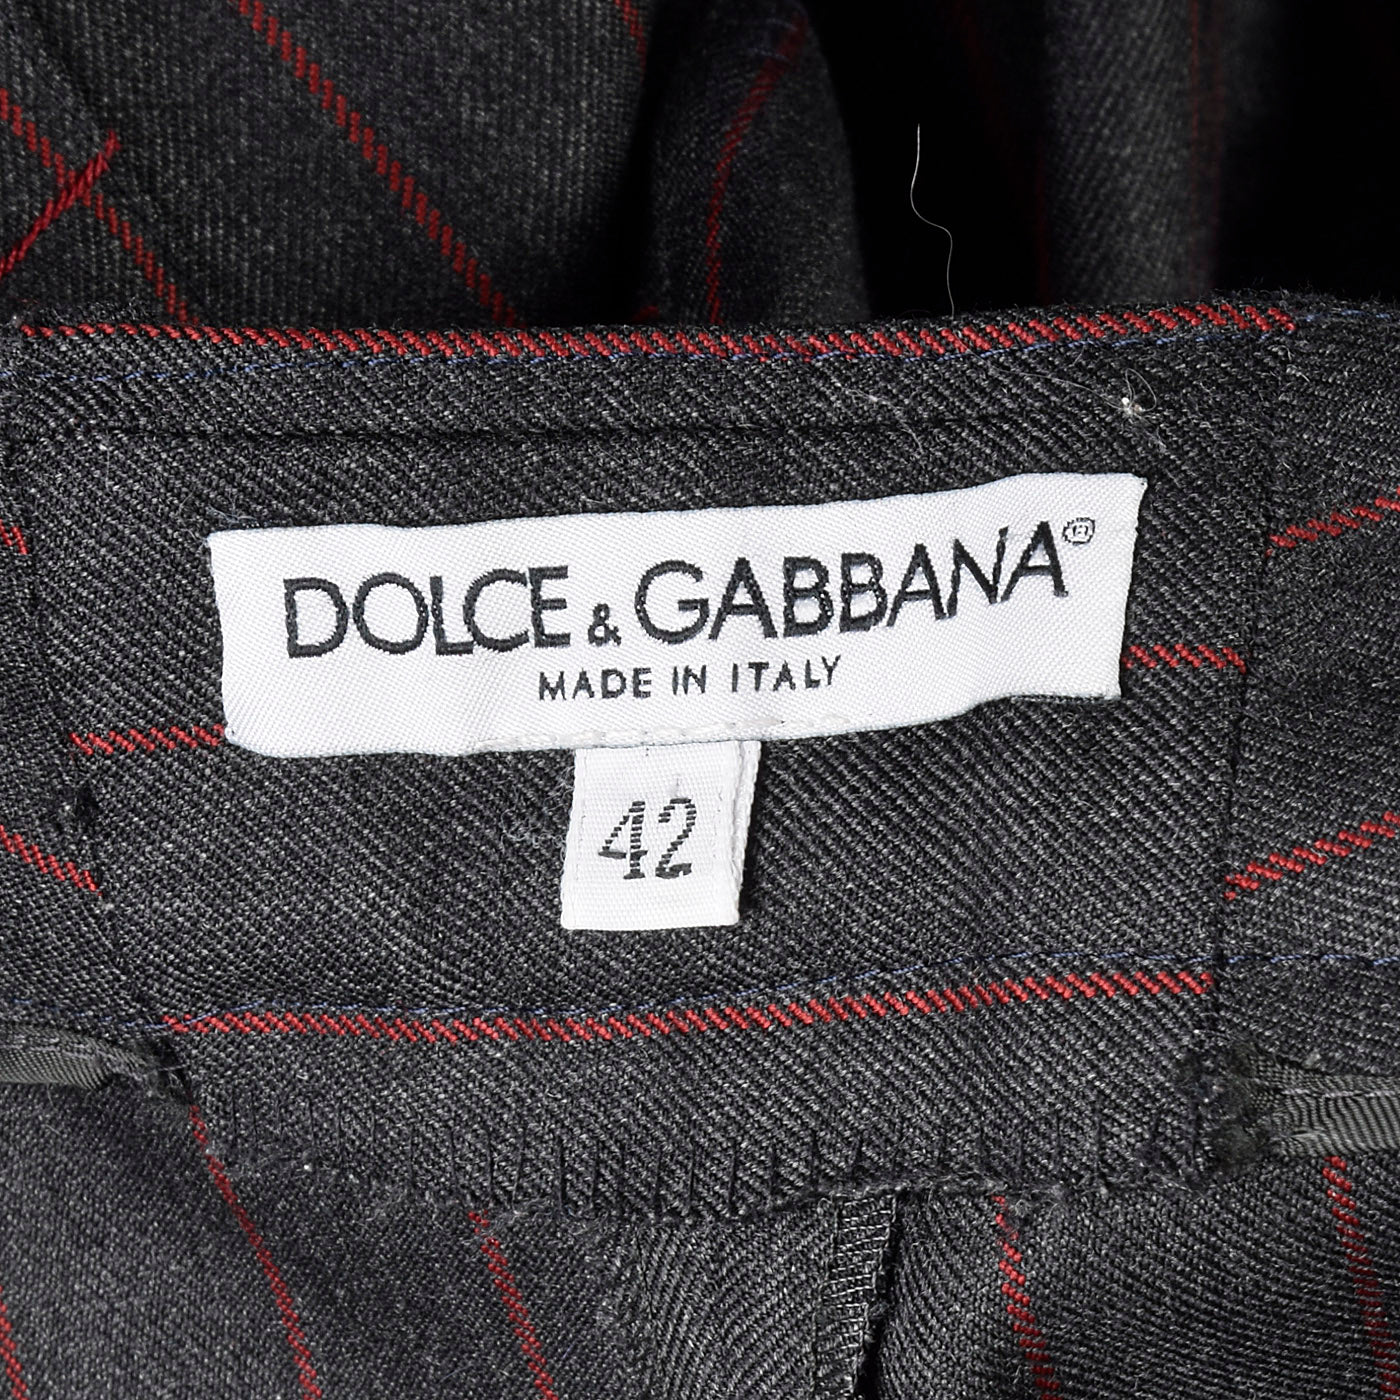 1990s Dolce & Gabbana Gray Trousers with Red Pinstripe